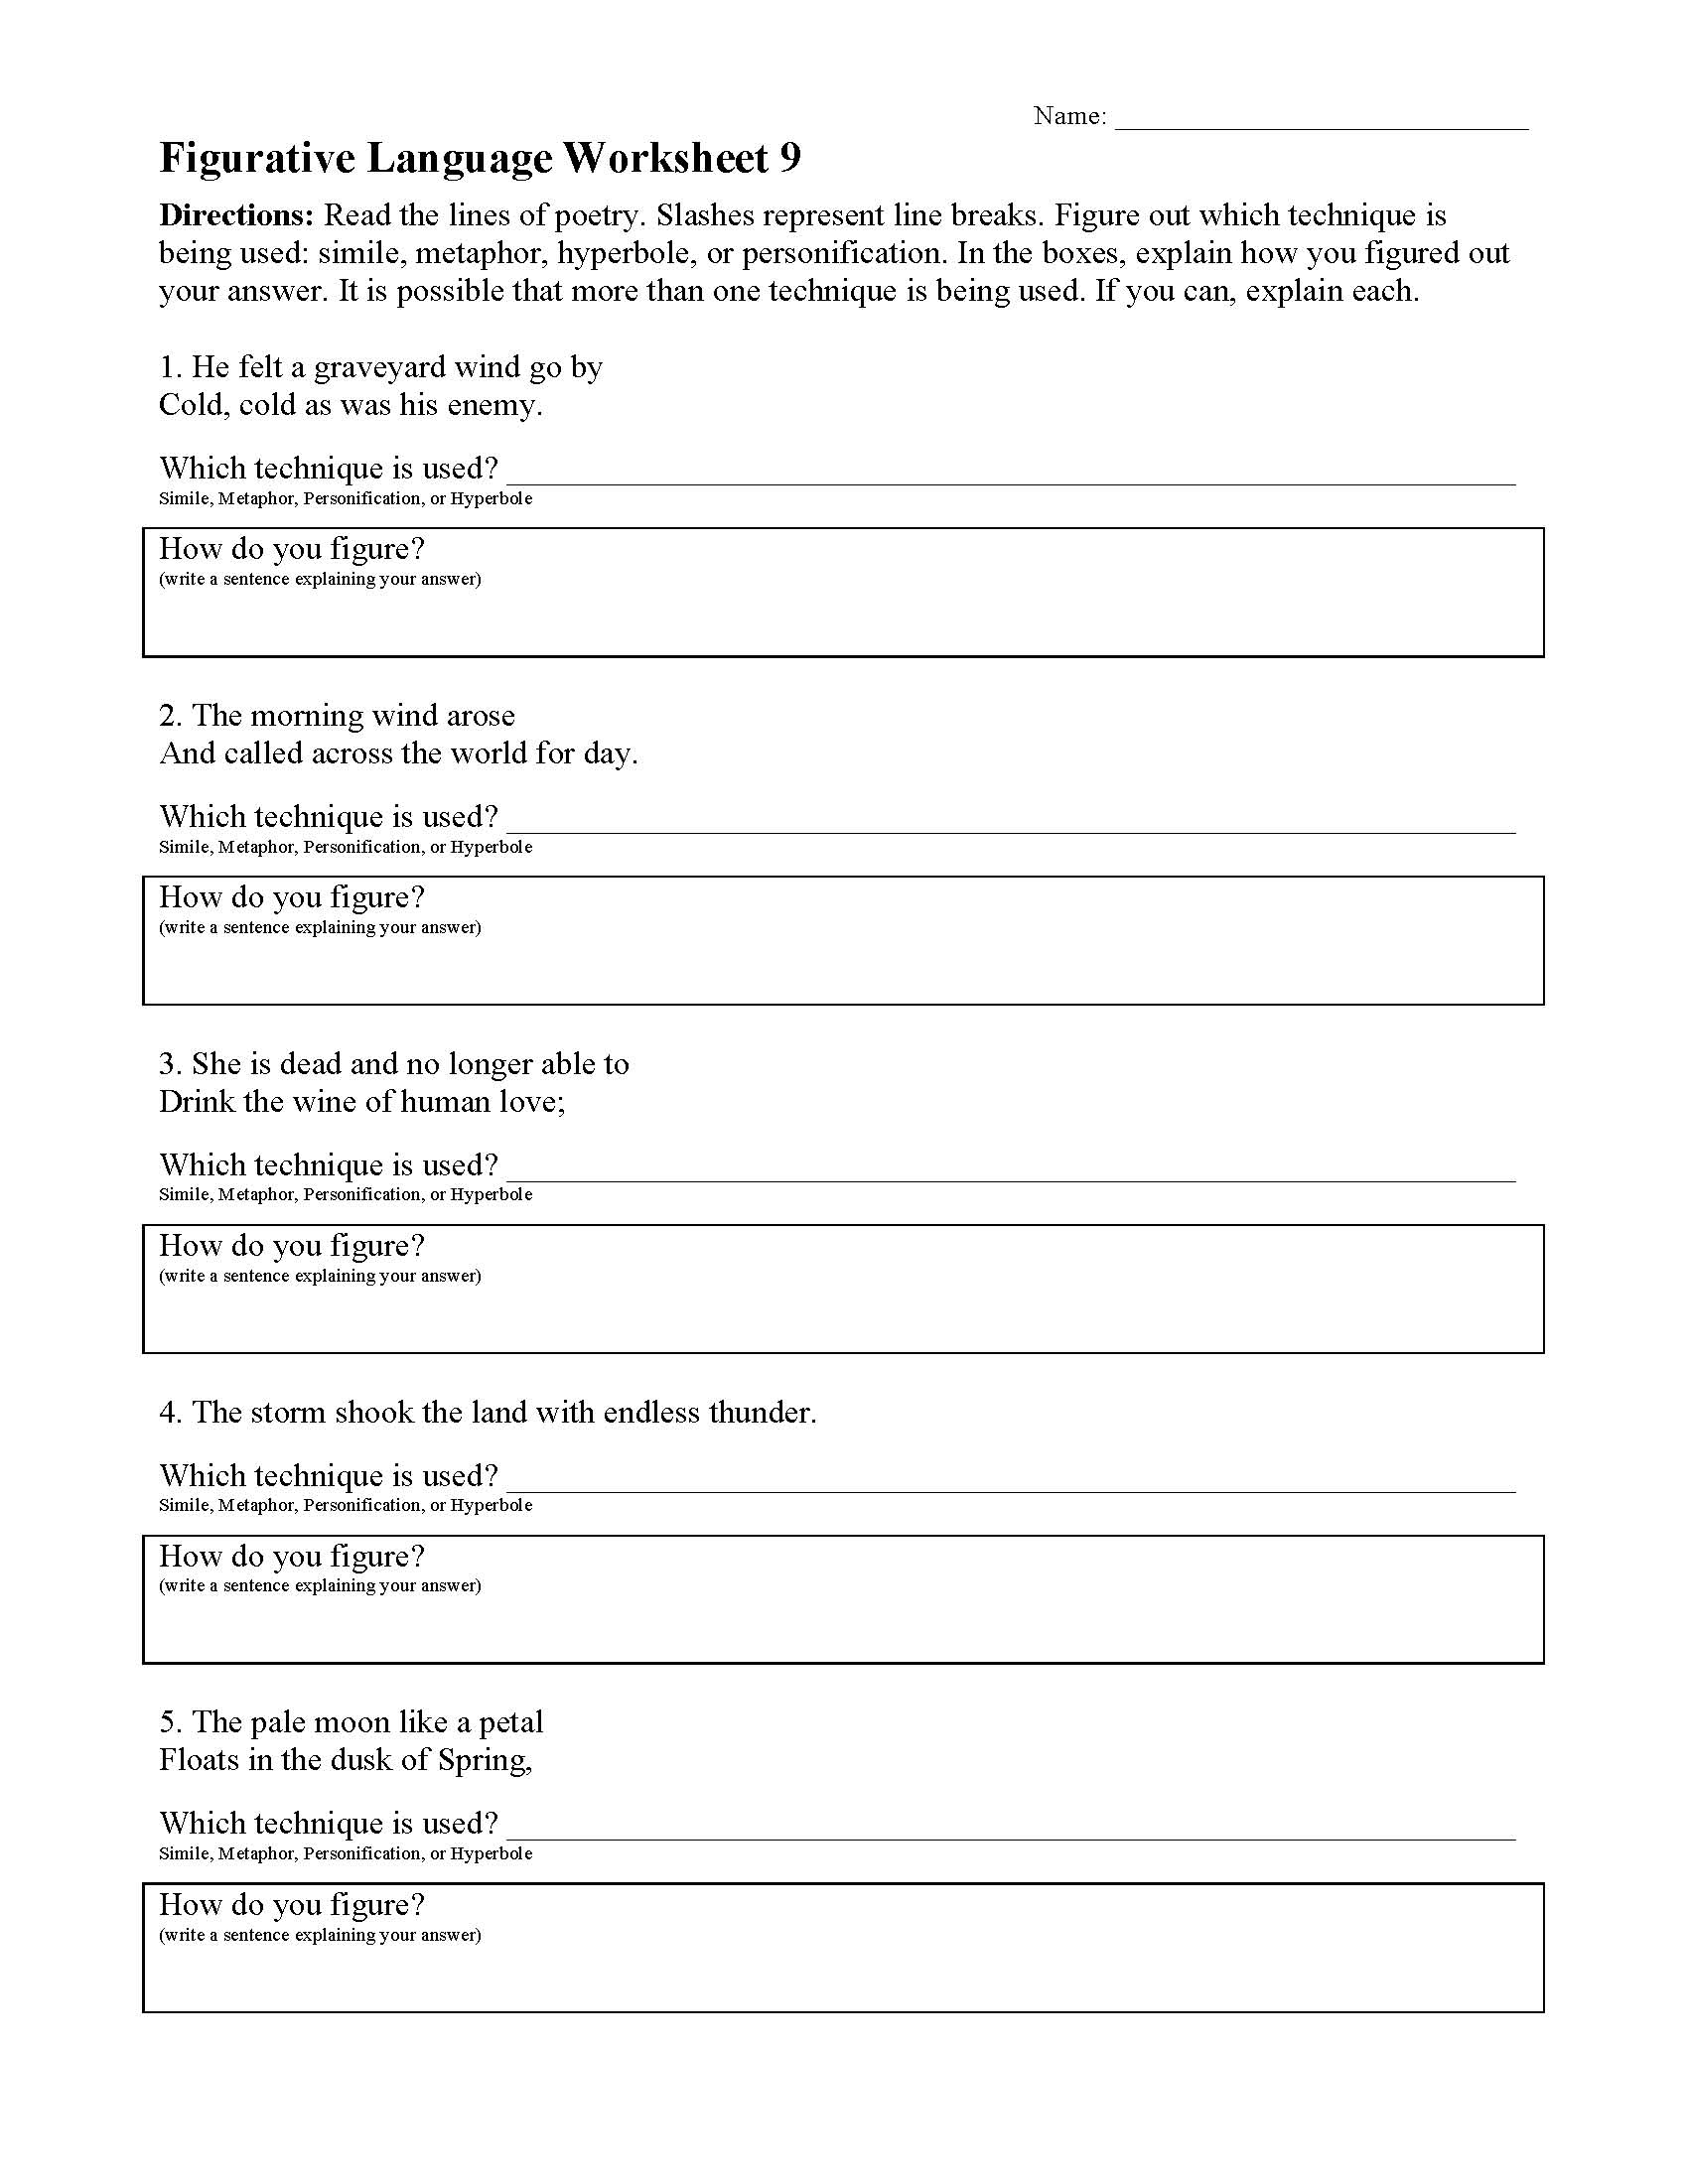 ereading-figurative-language-powerpoint-emanuel-hill-s-reading-worksheets